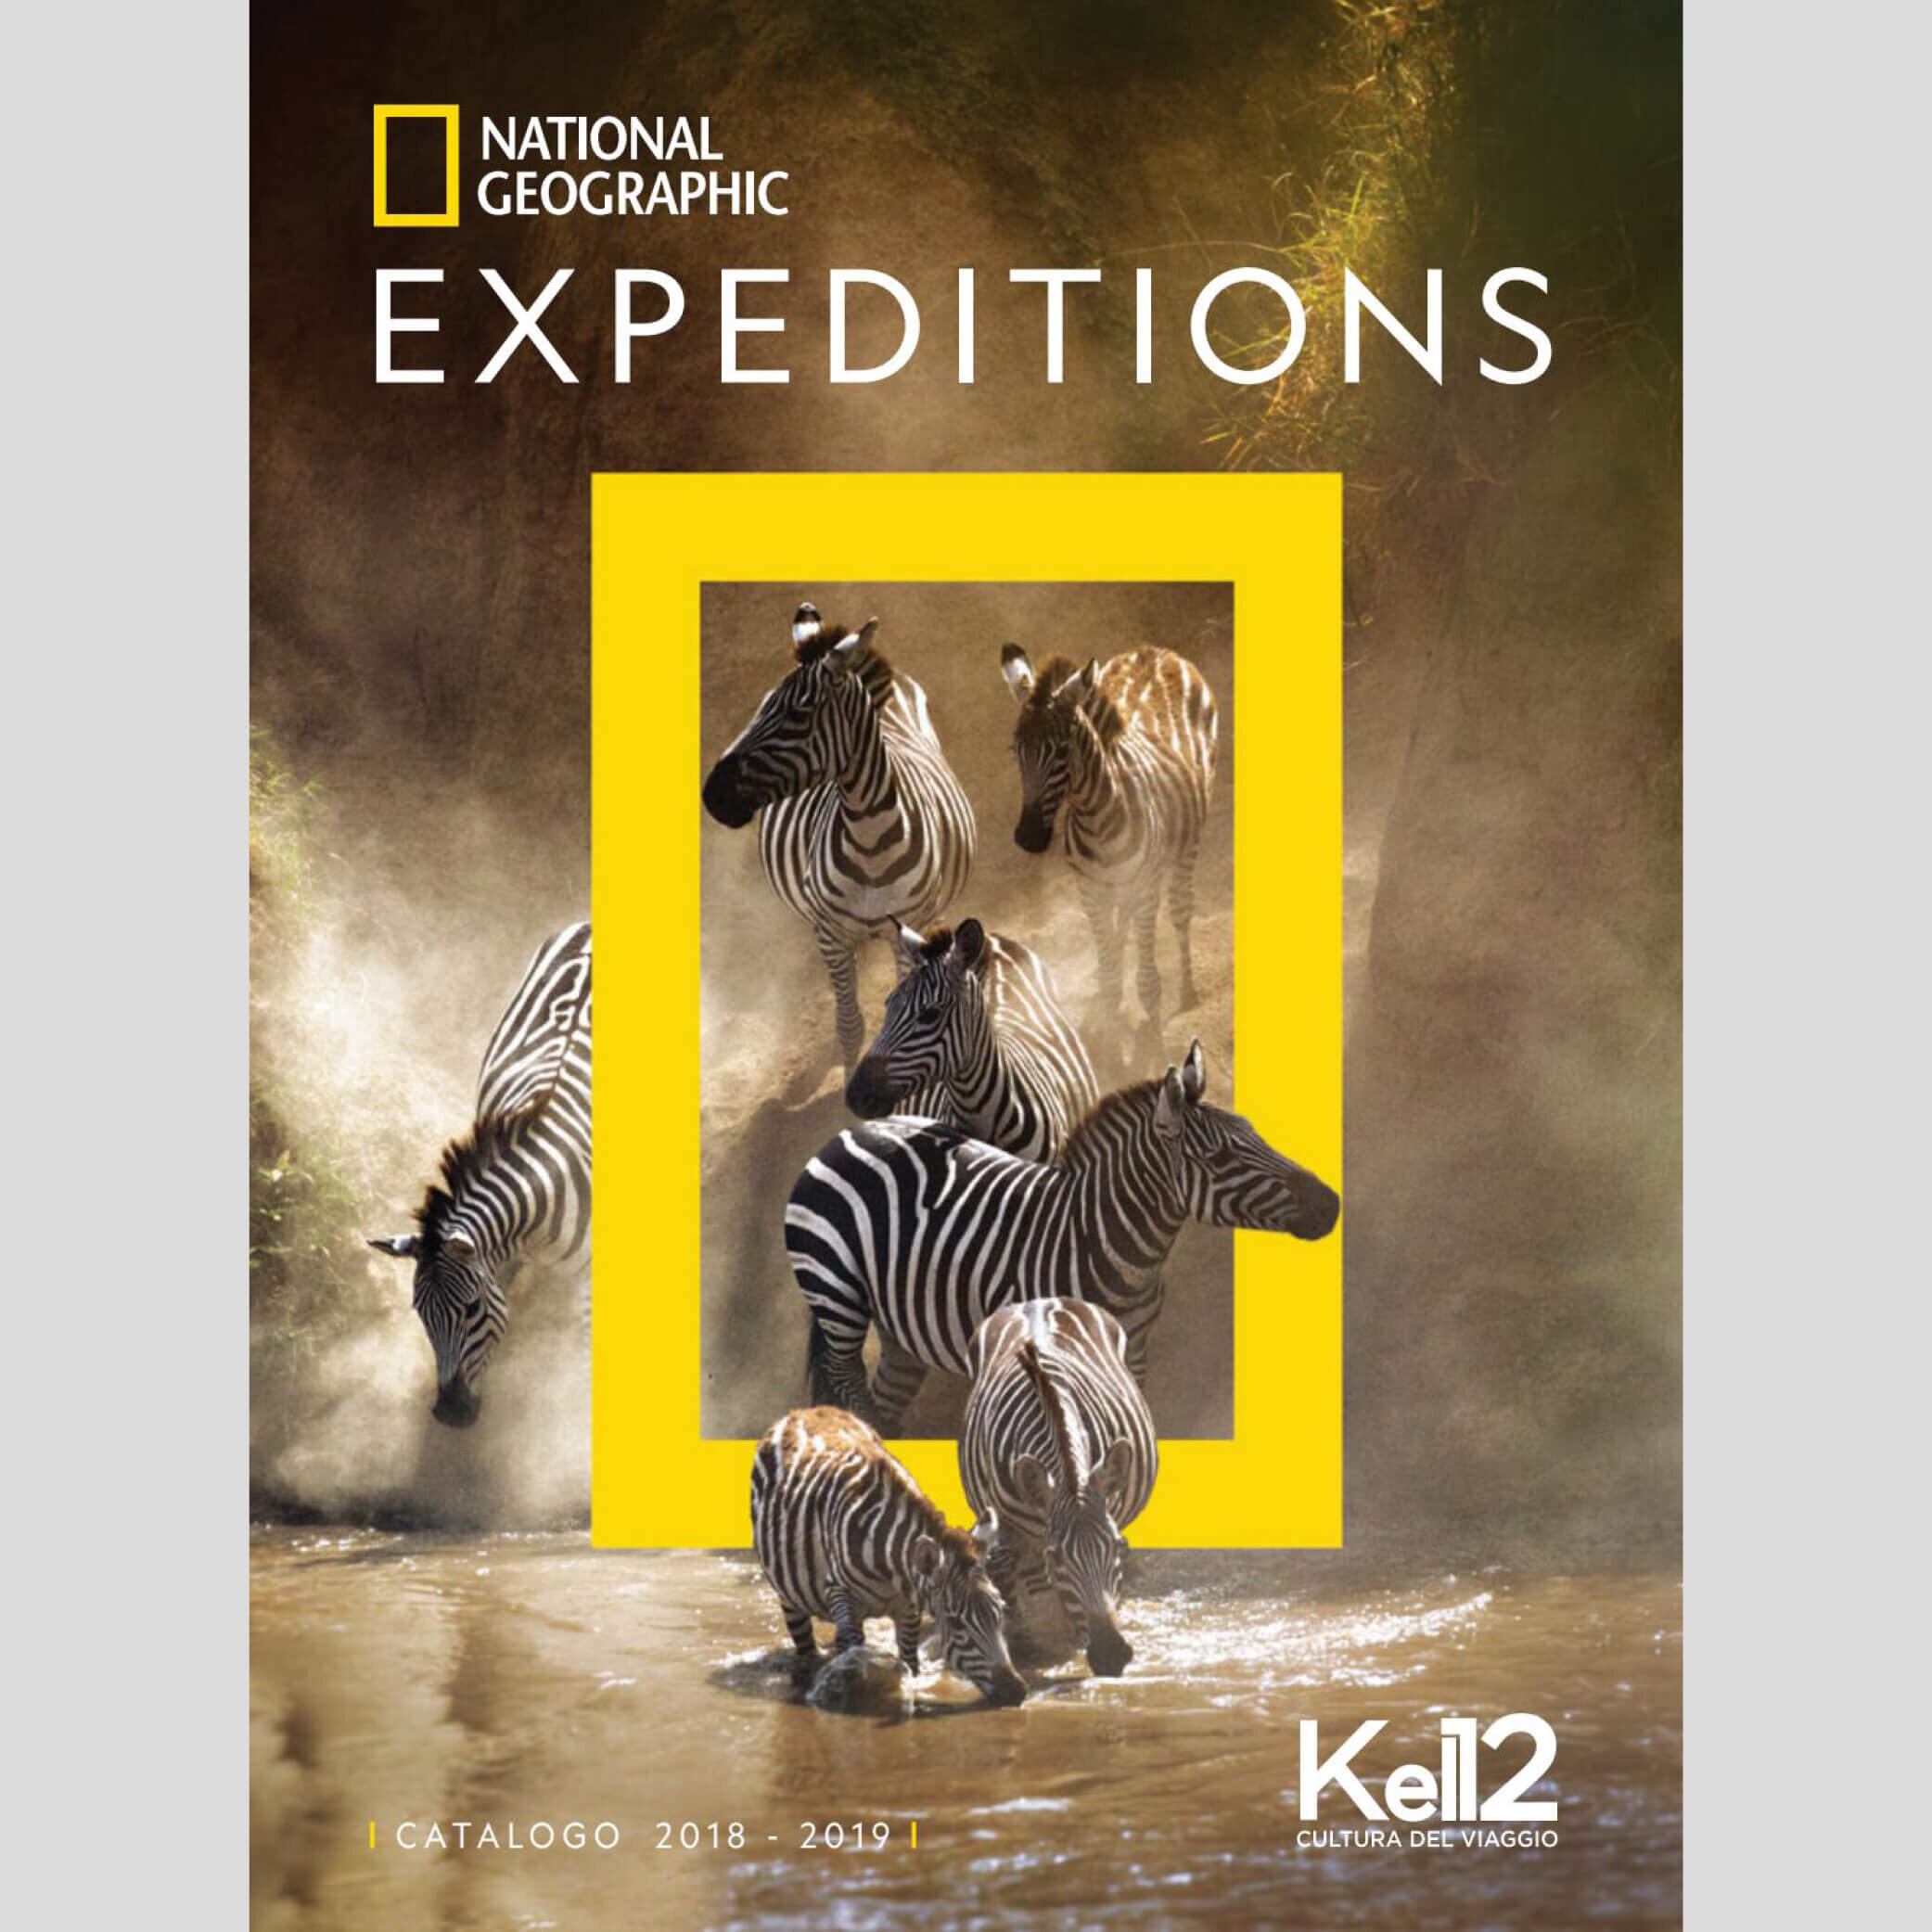 KEL 12 - NATIONAL GEOGRAPHIC EXPEDITIONS